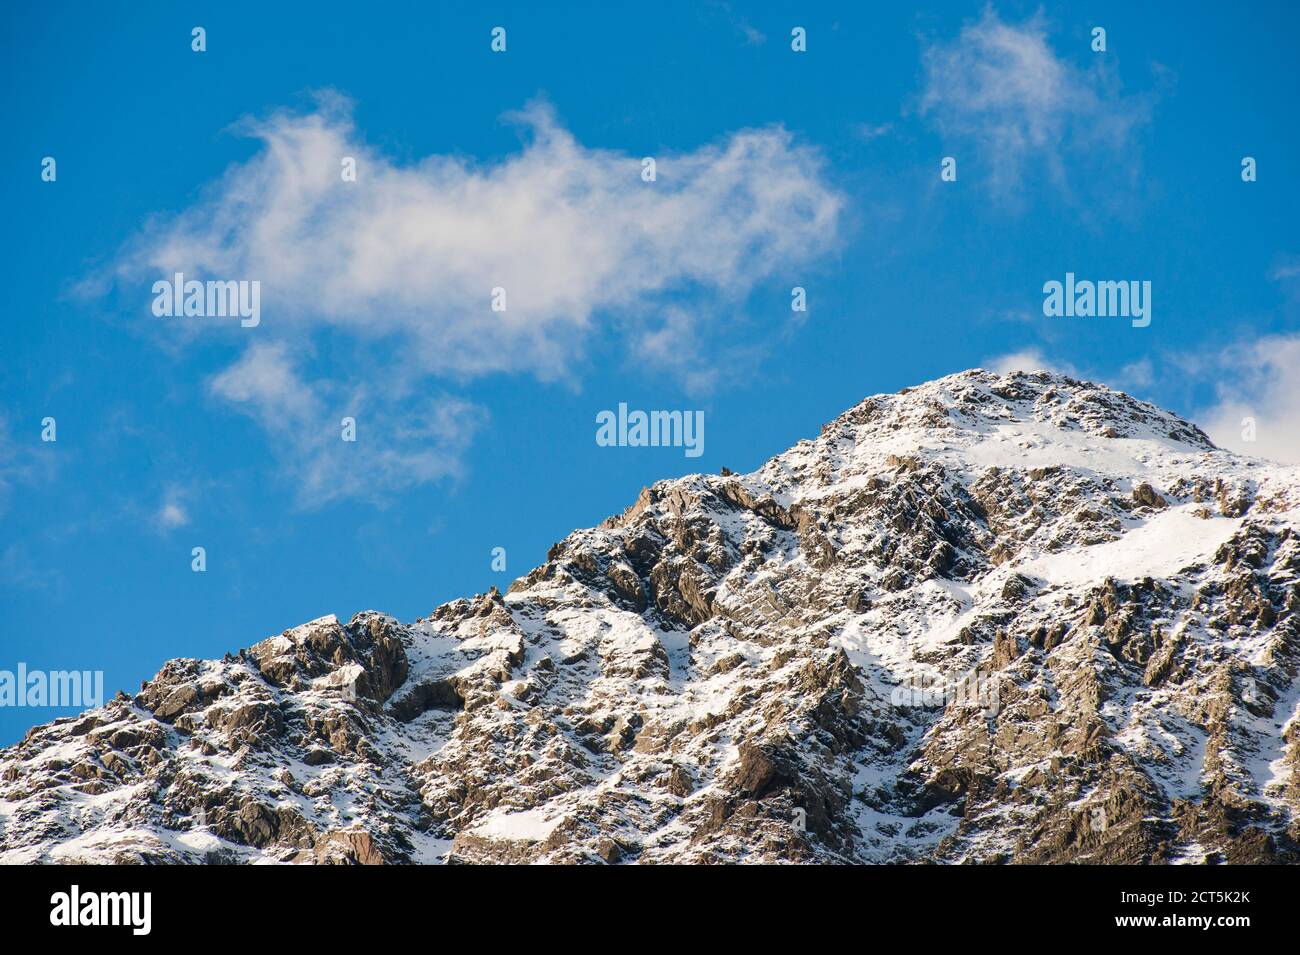 Close up of Snow Capped Mountains in Aoraki Mount Cook National Park, South Island, New Zealand Stock Photo